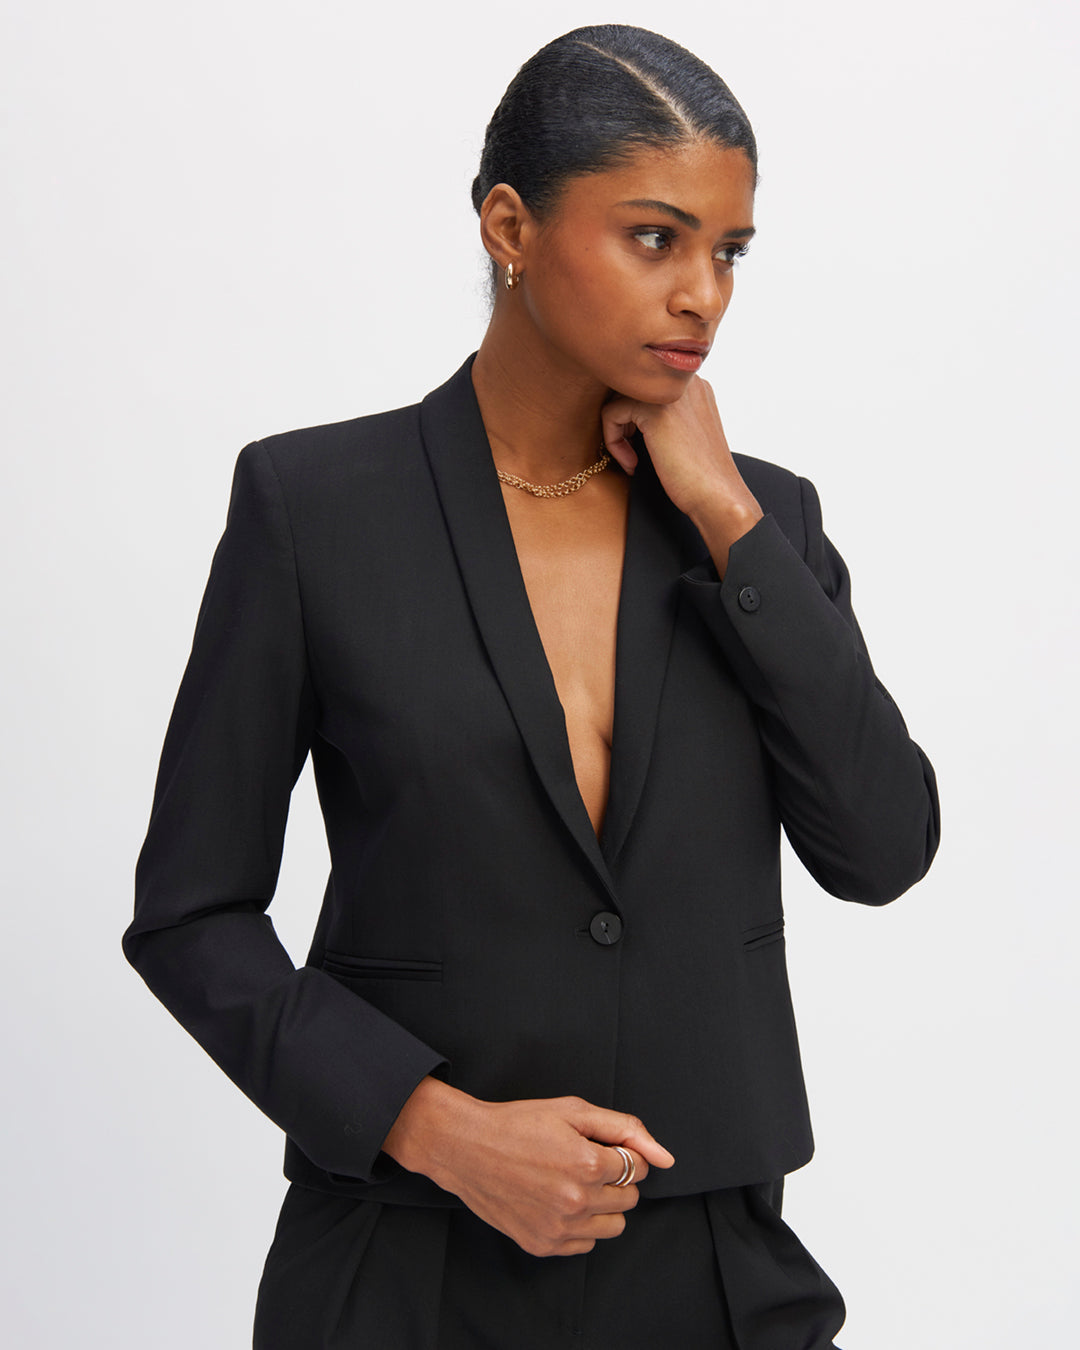 17H10-tailors-for-women-paris-Black-tailor-jacket-Spencer-cut-Collar-shawl-Short-jacket-Two-pockets-pass-piped-One-lining-beige-bright-Two-large-pockets-inside